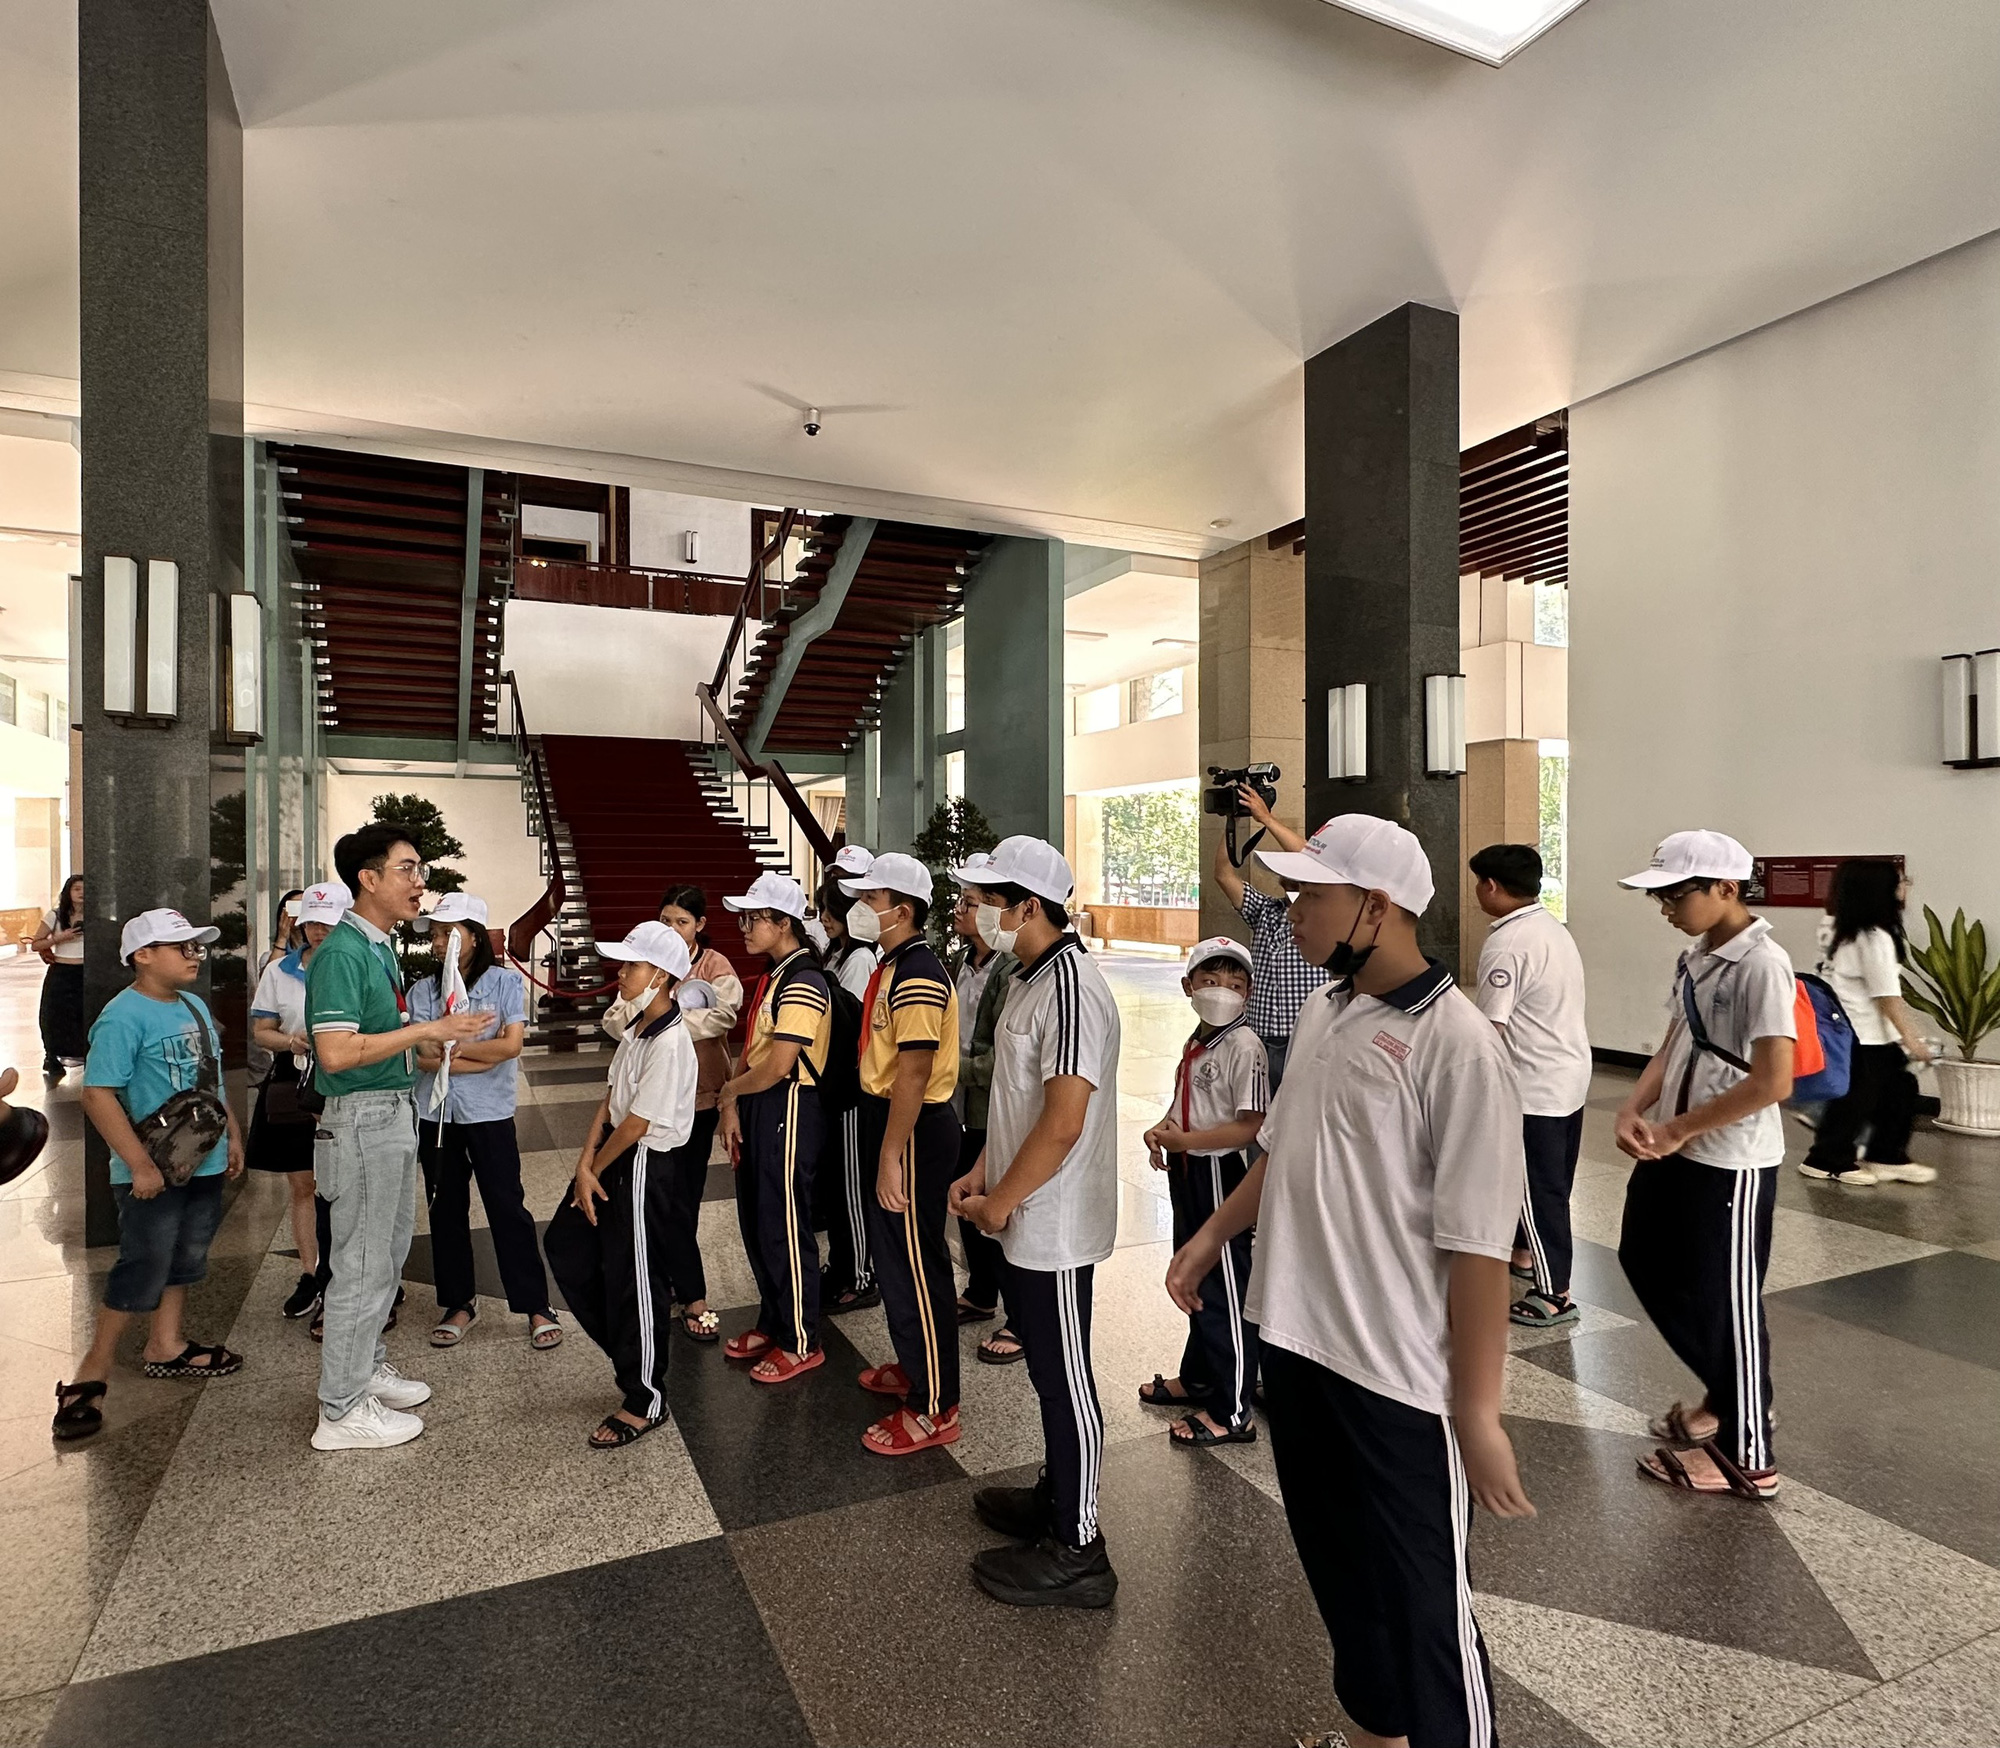 Some students said it was their first trip to the Reunification Palace in District 1, Ho Chi Minh City. Photo: Hai Kim / Tuoi Tre